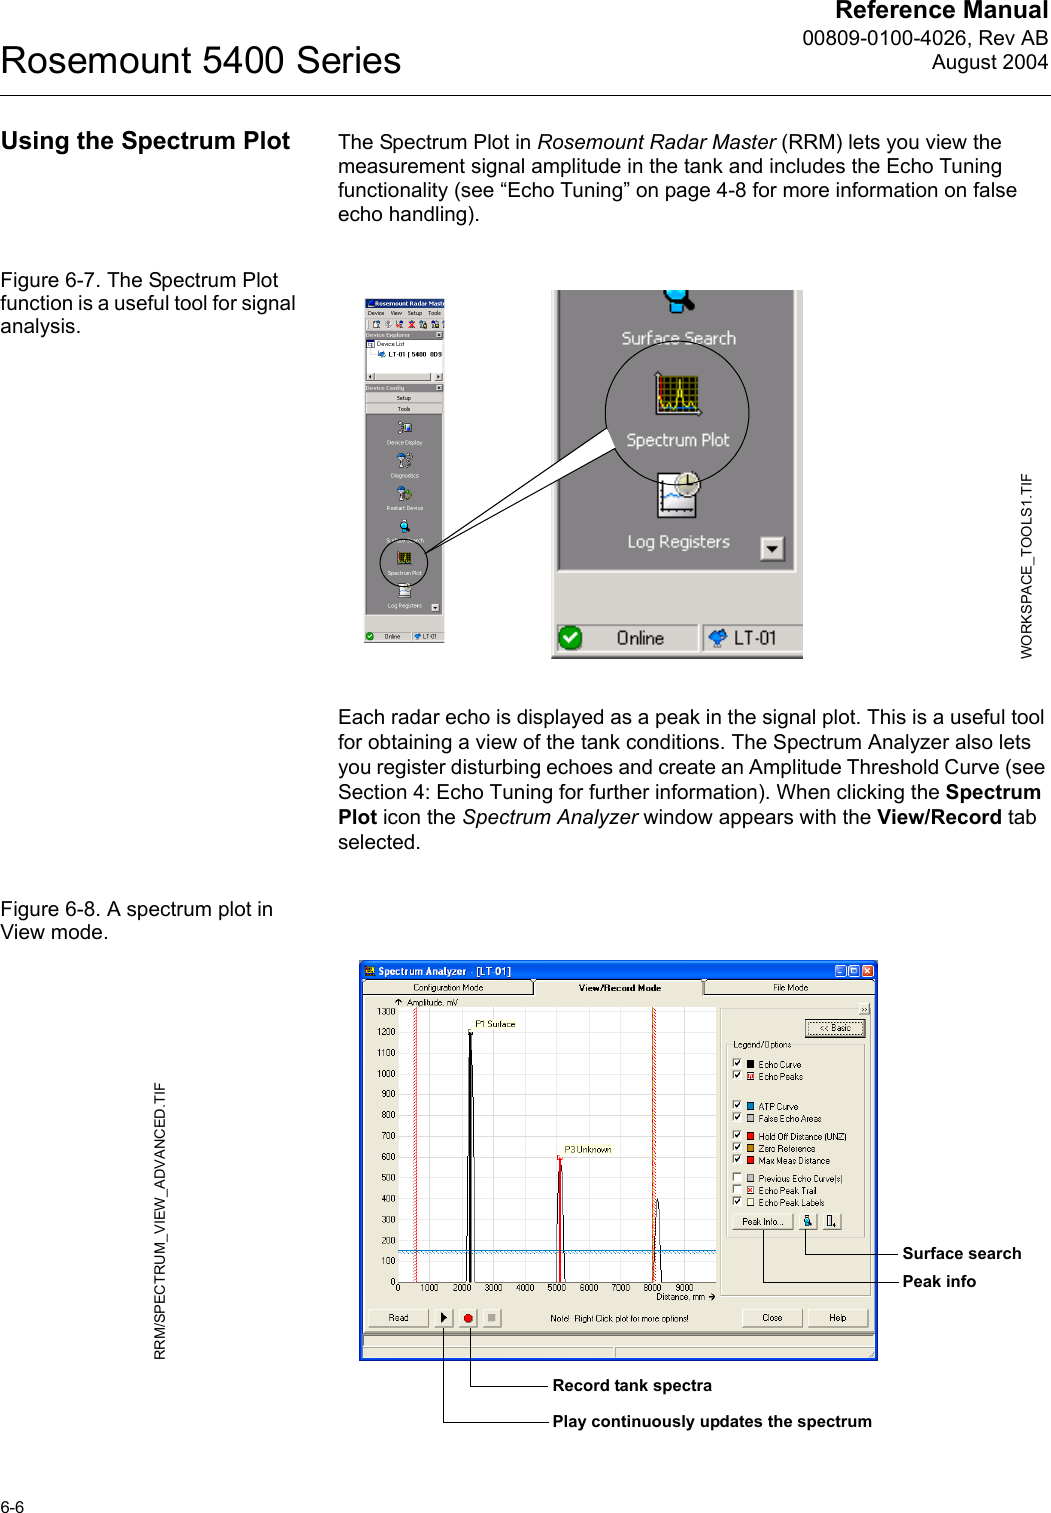 Reference Manual00809-0100-4026, Rev ABAugust 2004Rosemount 5400 Series6-6Using the Spectrum Plot The Spectrum Plot in Rosemount Radar Master (RRM) lets you view the measurement signal amplitude in the tank and includes the Echo Tuning functionality (see “Echo Tuning” on page 4-8 for more information on false echo handling). Figure 6-7. The Spectrum Plot function is a useful tool for signal analysis.Each radar echo is displayed as a peak in the signal plot. This is a useful tool for obtaining a view of the tank conditions. The Spectrum Analyzer also lets you register disturbing echoes and create an Amplitude Threshold Curve (see Section 4: Echo Tuning for further information). When clicking the Spectrum Plot icon the Spectrum Analyzer window appears with the View/Record tab selected.Figure 6-8. A spectrum plot in View mode.WORKSPACE_TOOLS1.TIFRRM/SPECTRUM_VIEW_ADVANCED.TIFSurface searchPeak infoRecord tank spectraPlay continuously updates the spectrum